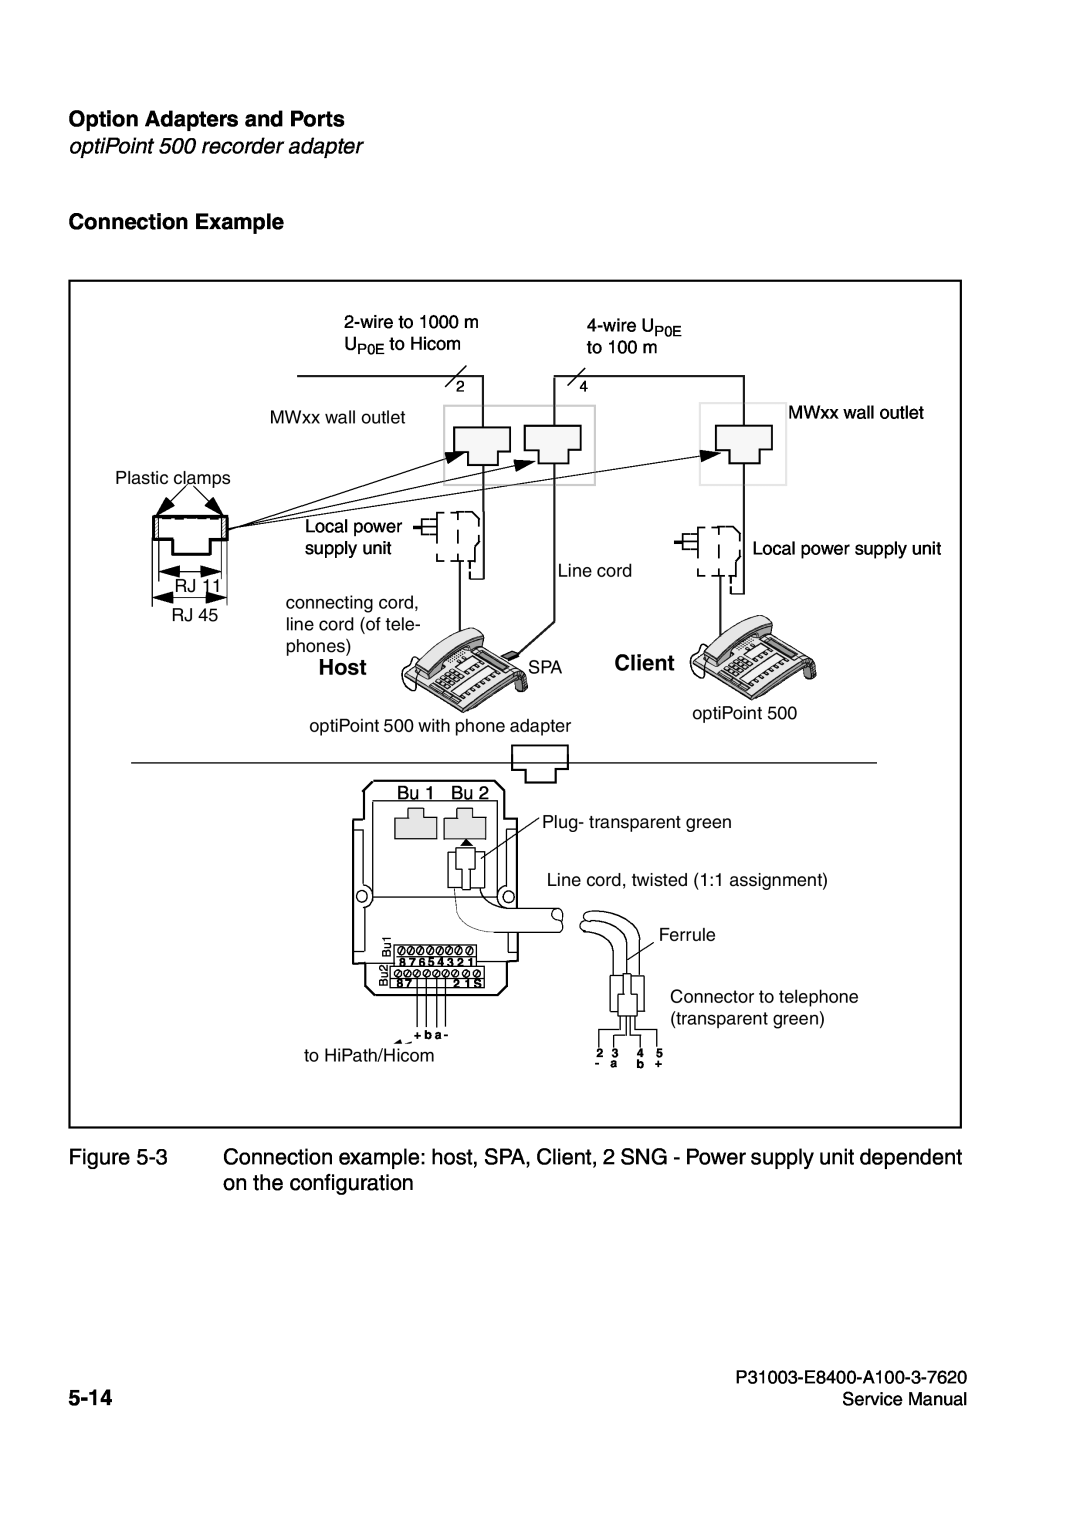 Siemens 500 service manual Option Adapters and Ports, Connection Example, Client, Host, 5-14 